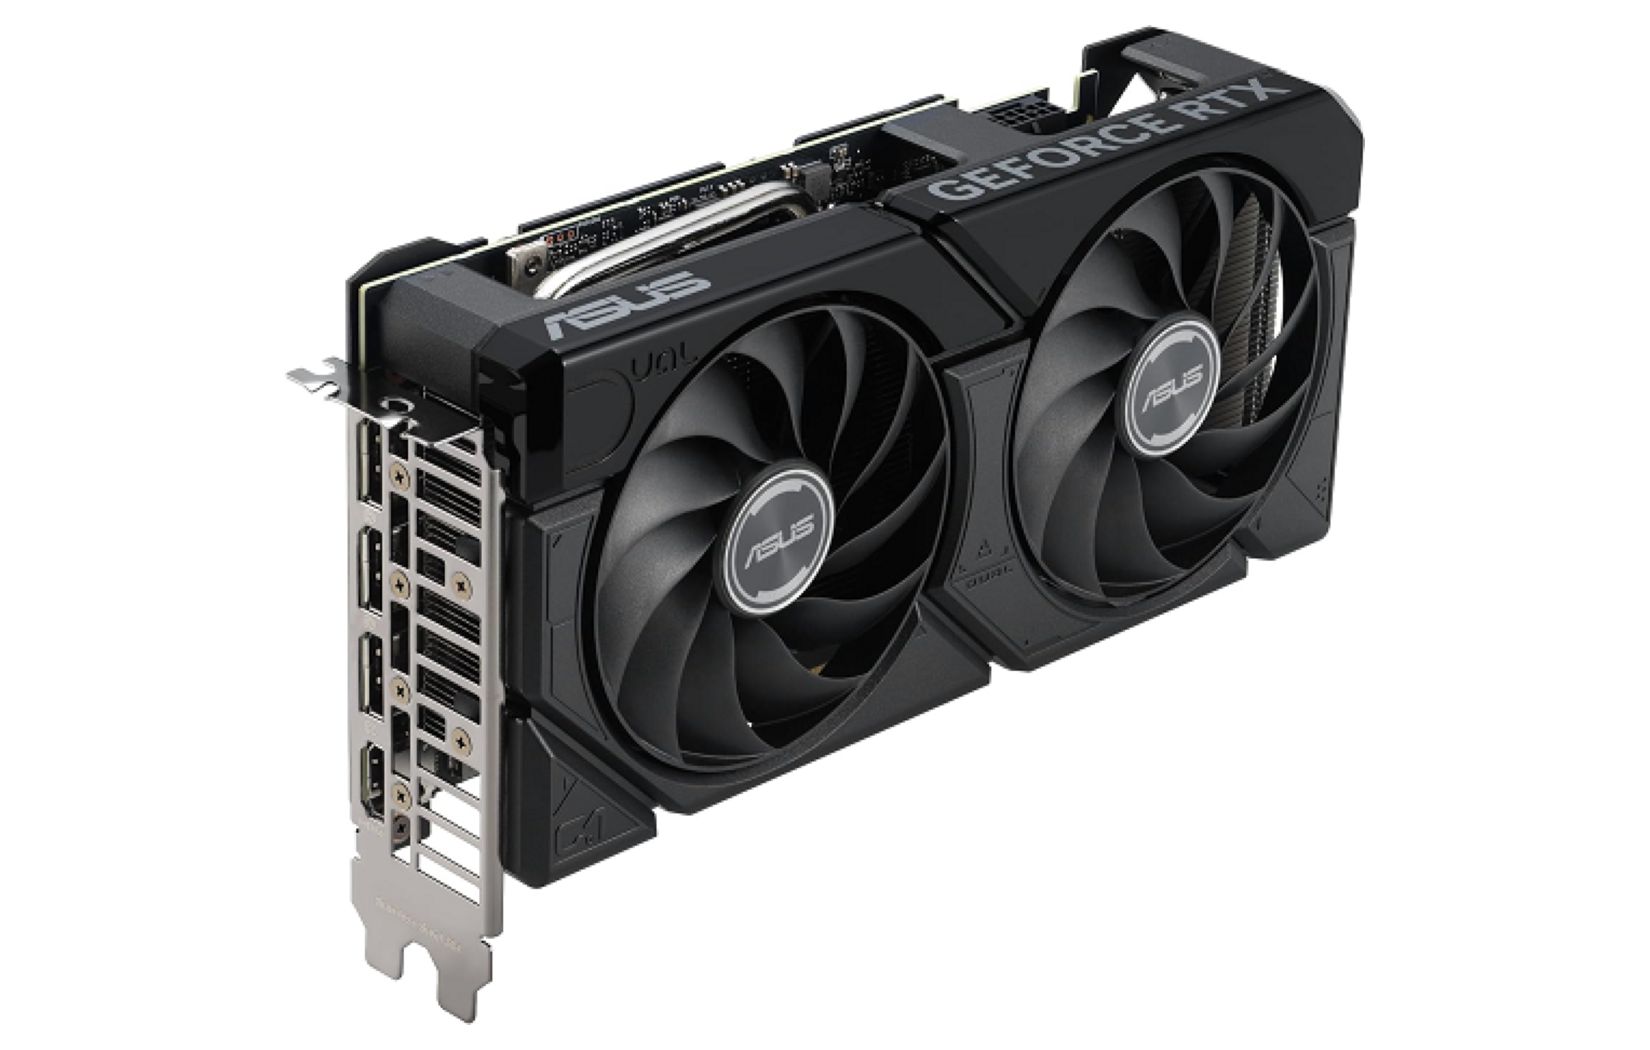 ASUS GeForce RTX 4070 SUPER DUAL with 12GB memory has been leaked 